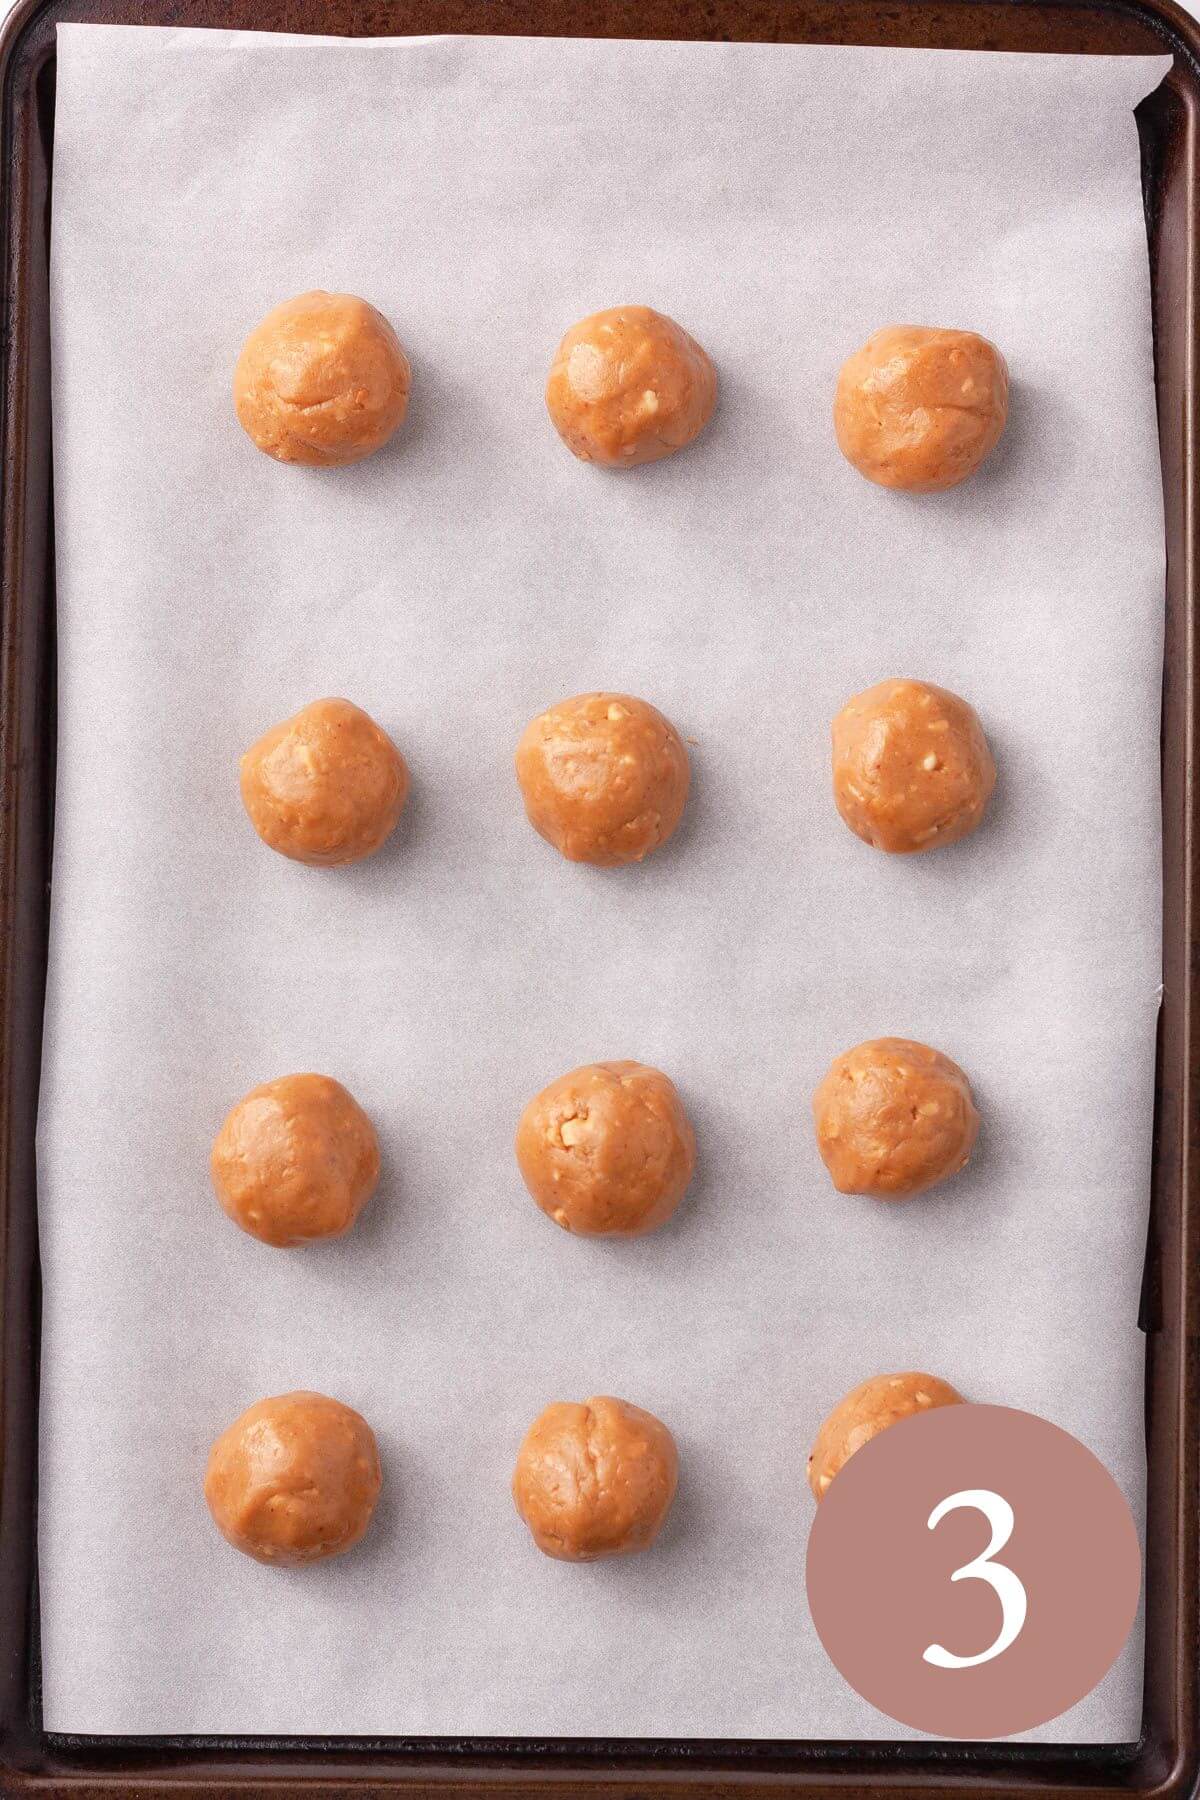 Overhead image of 12 peanut butter cookie dough balls on cookie sheet lined with parchment paper.